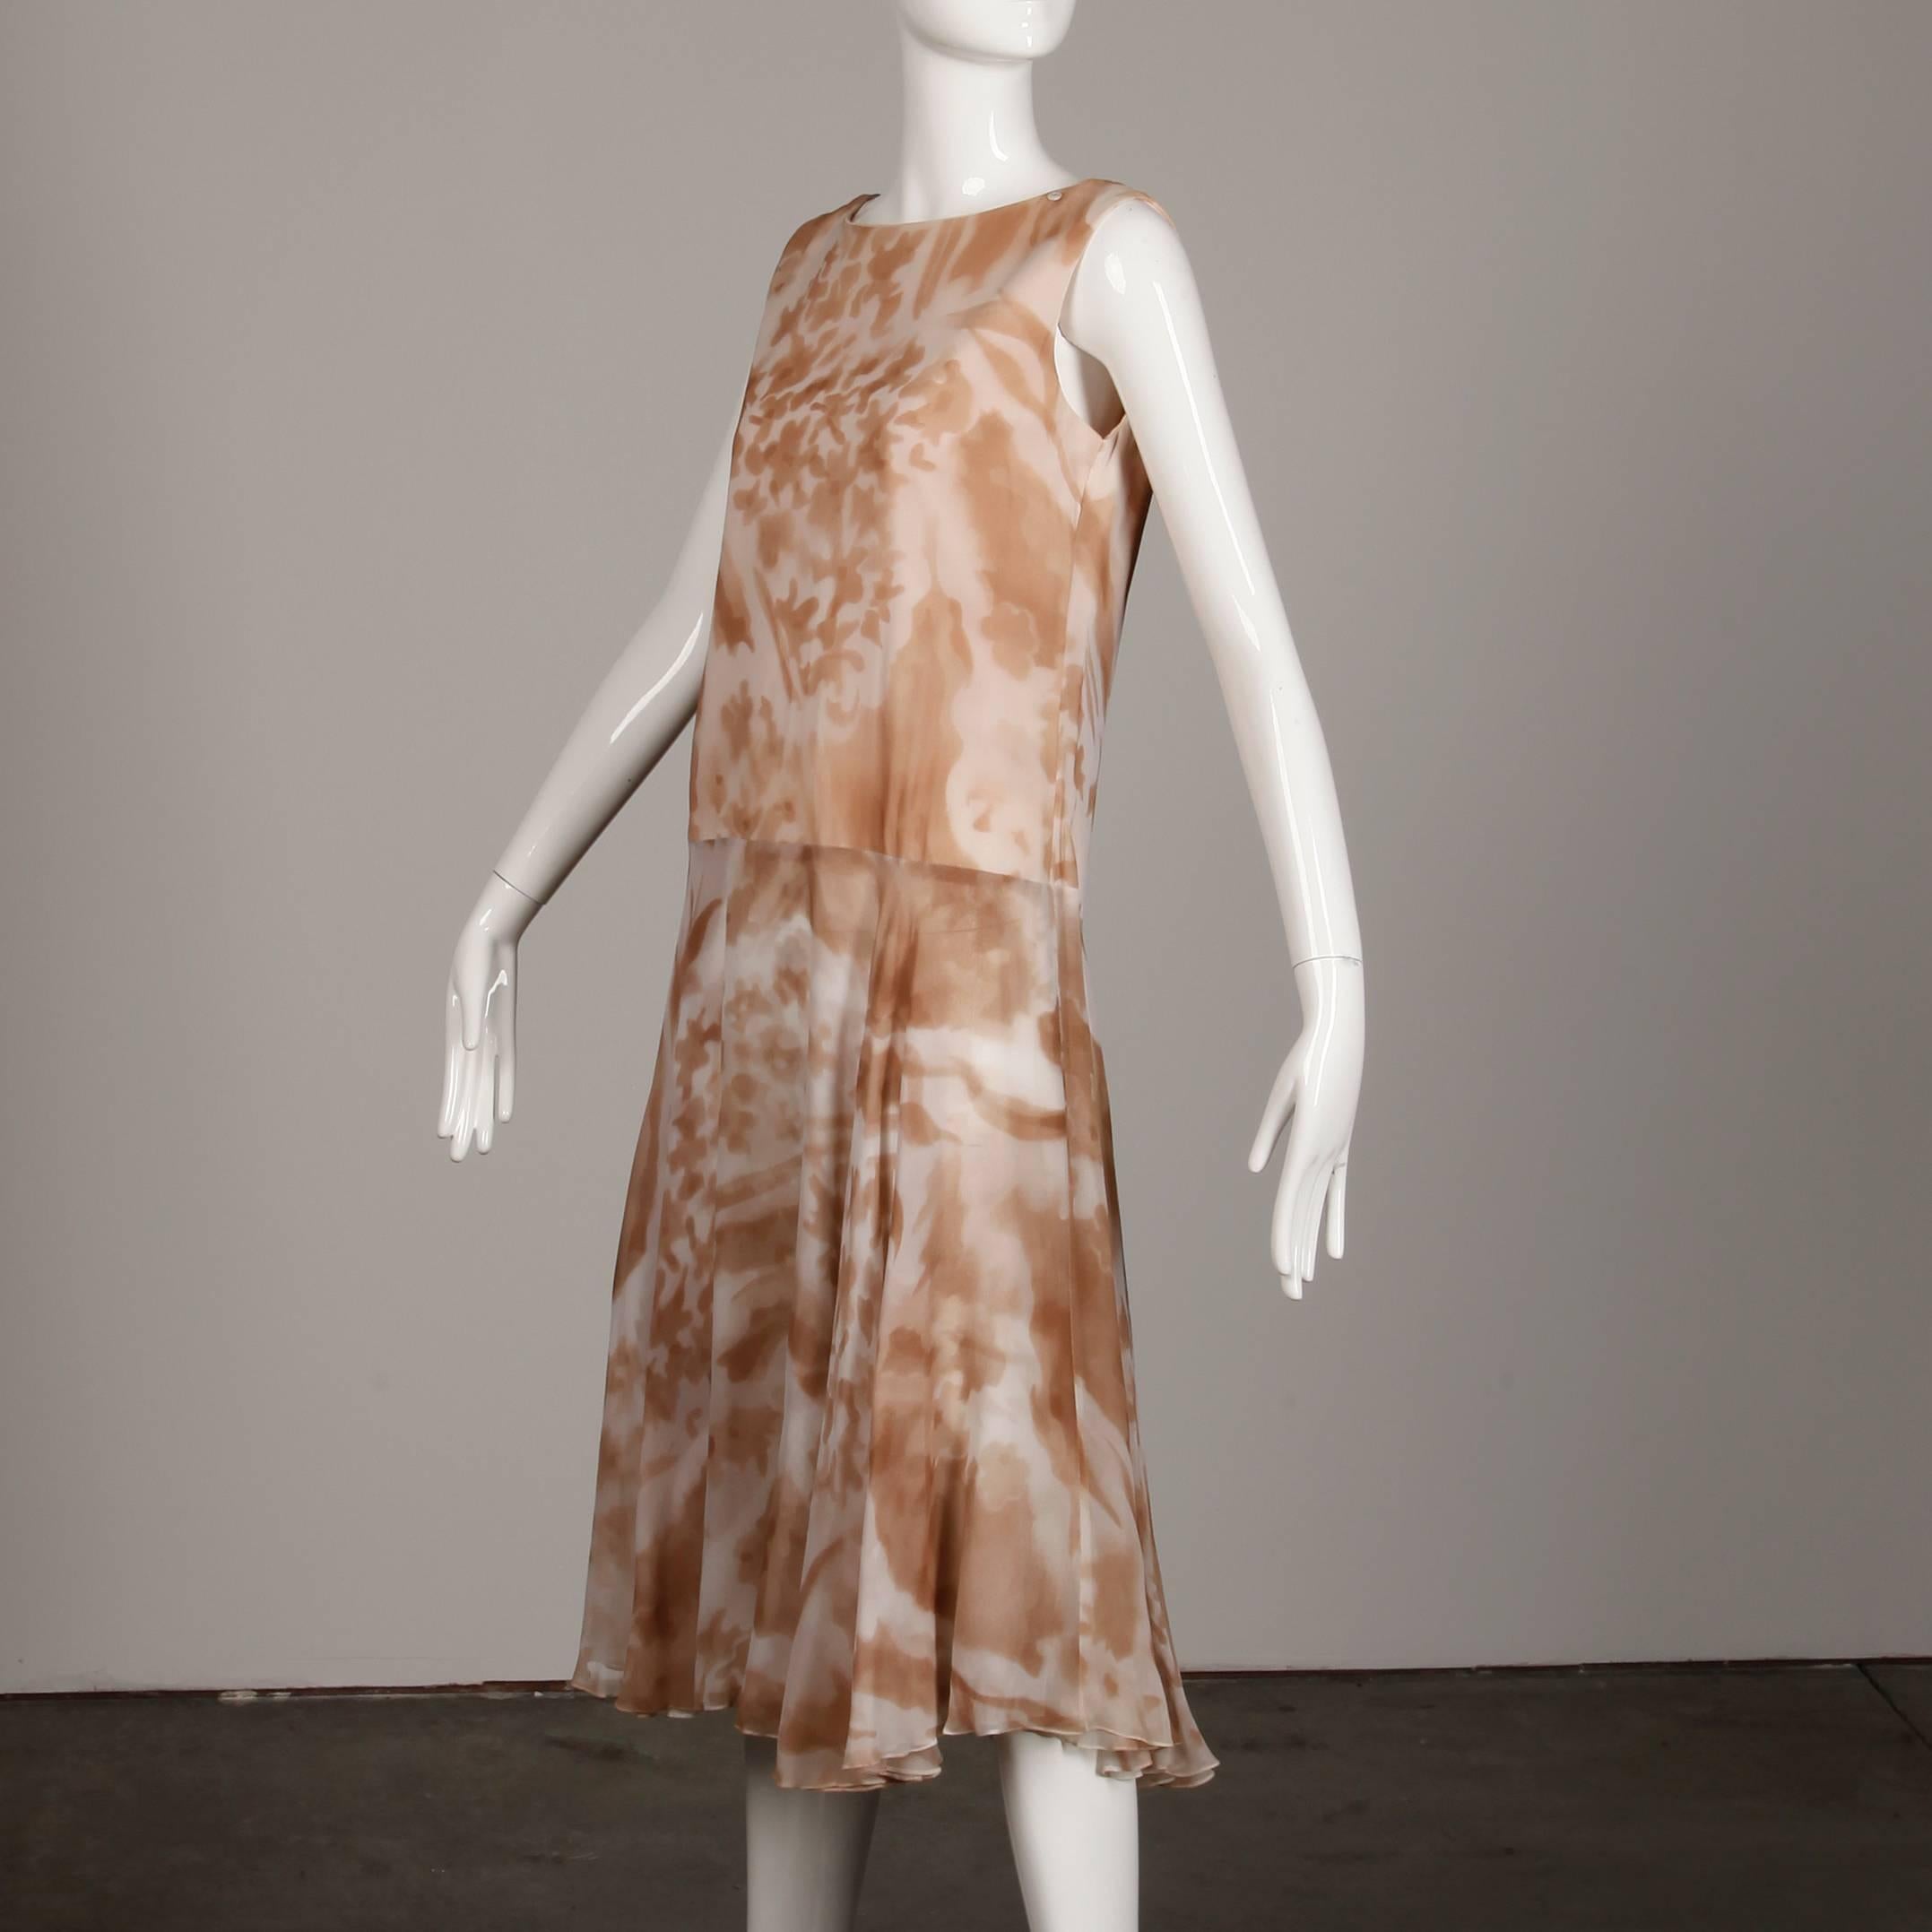 1970s Mr. Blackwell Vintage Sheer Silk Chiffon Print Dress with Detachable Cape For Sale 6